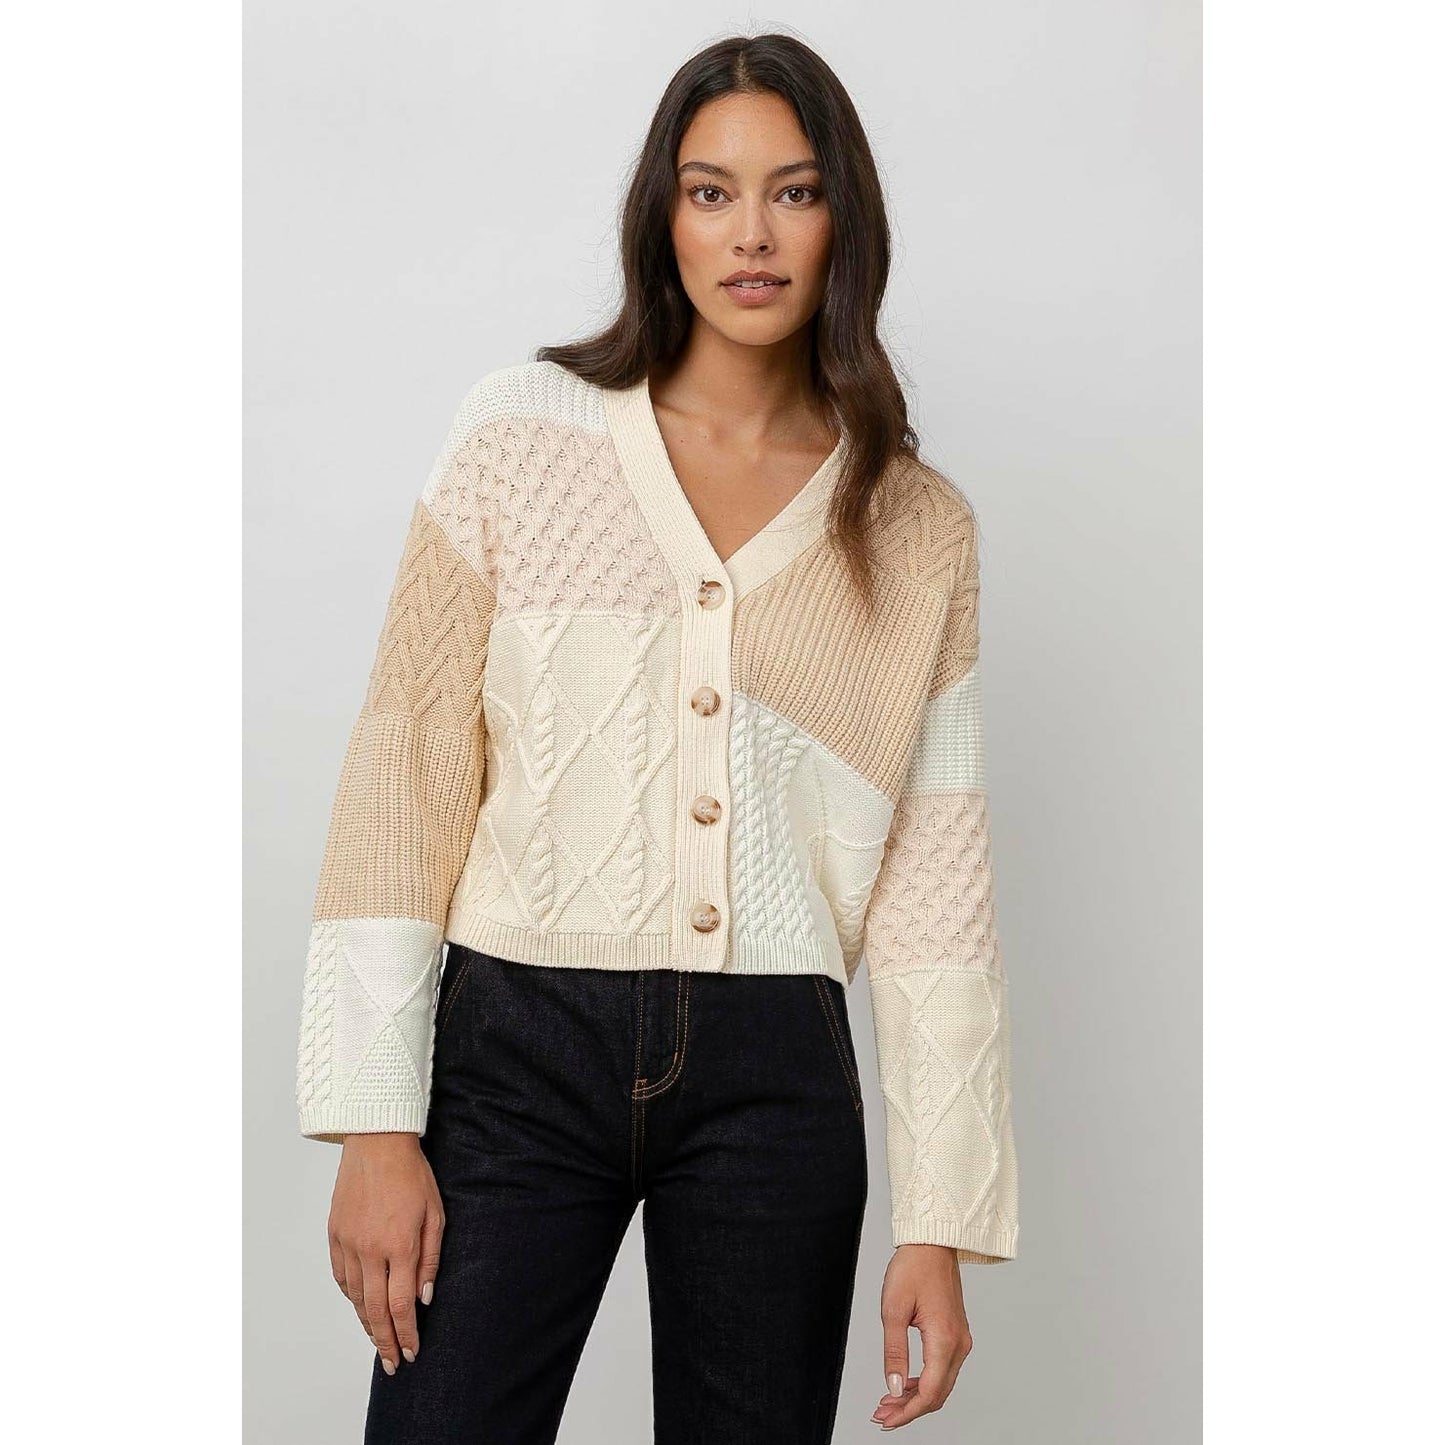 REESE - CREAM PATCHWORK CABLE